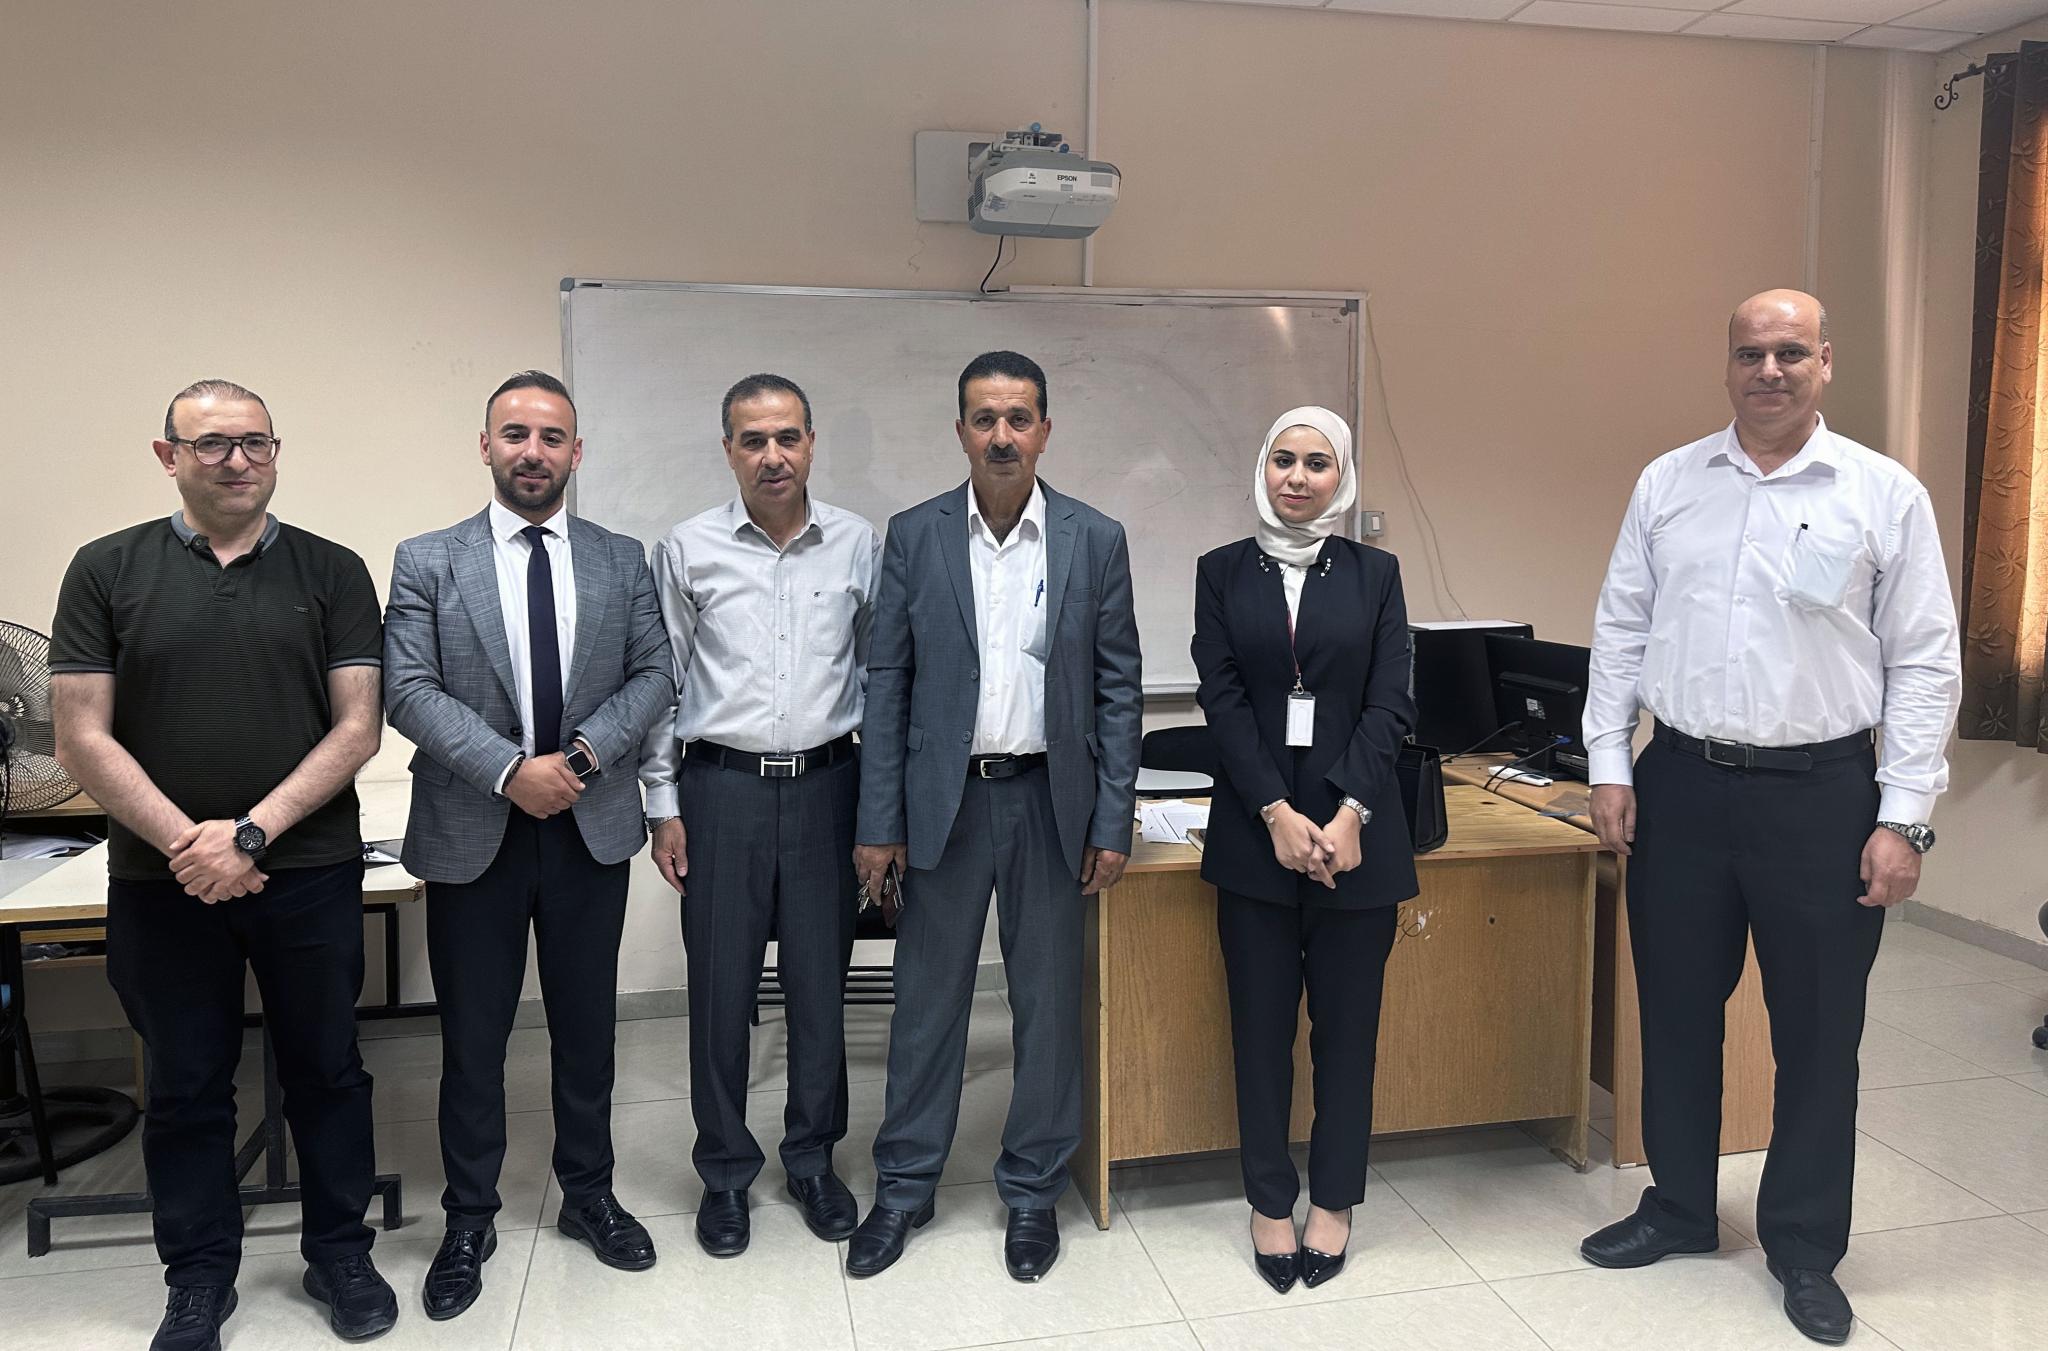 Hassib Sabbagh Information Technology Center of Excellence at the Arab American University and Safa Bank Discuss Ways of Joint Cooperation